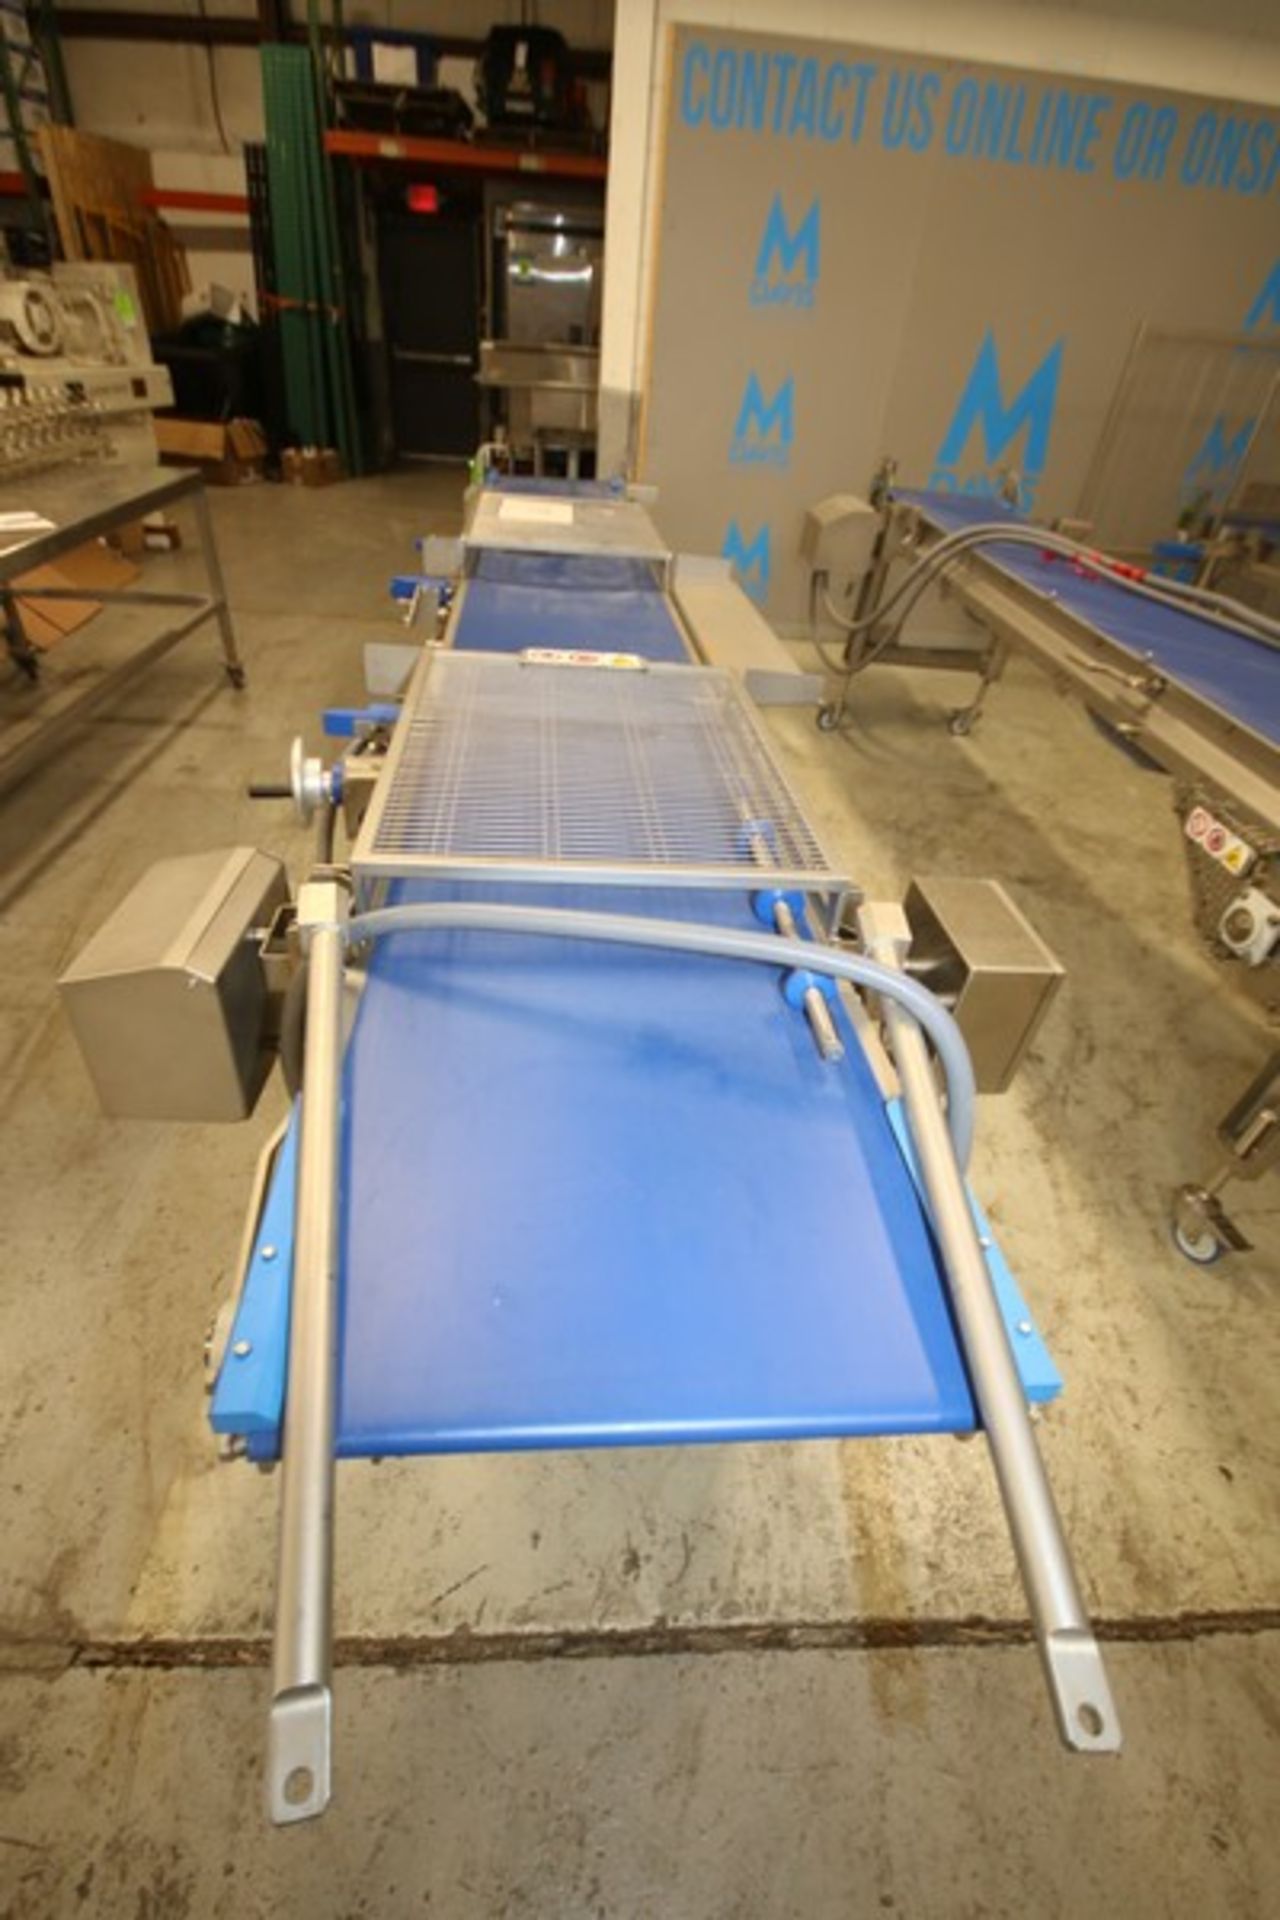 2019 Alimec Aprox. 159" L x 19 1/2" W x 34" H S/S Belt Conveyor, SN 813-55, with Bauer S/S Drive - Image 3 of 6